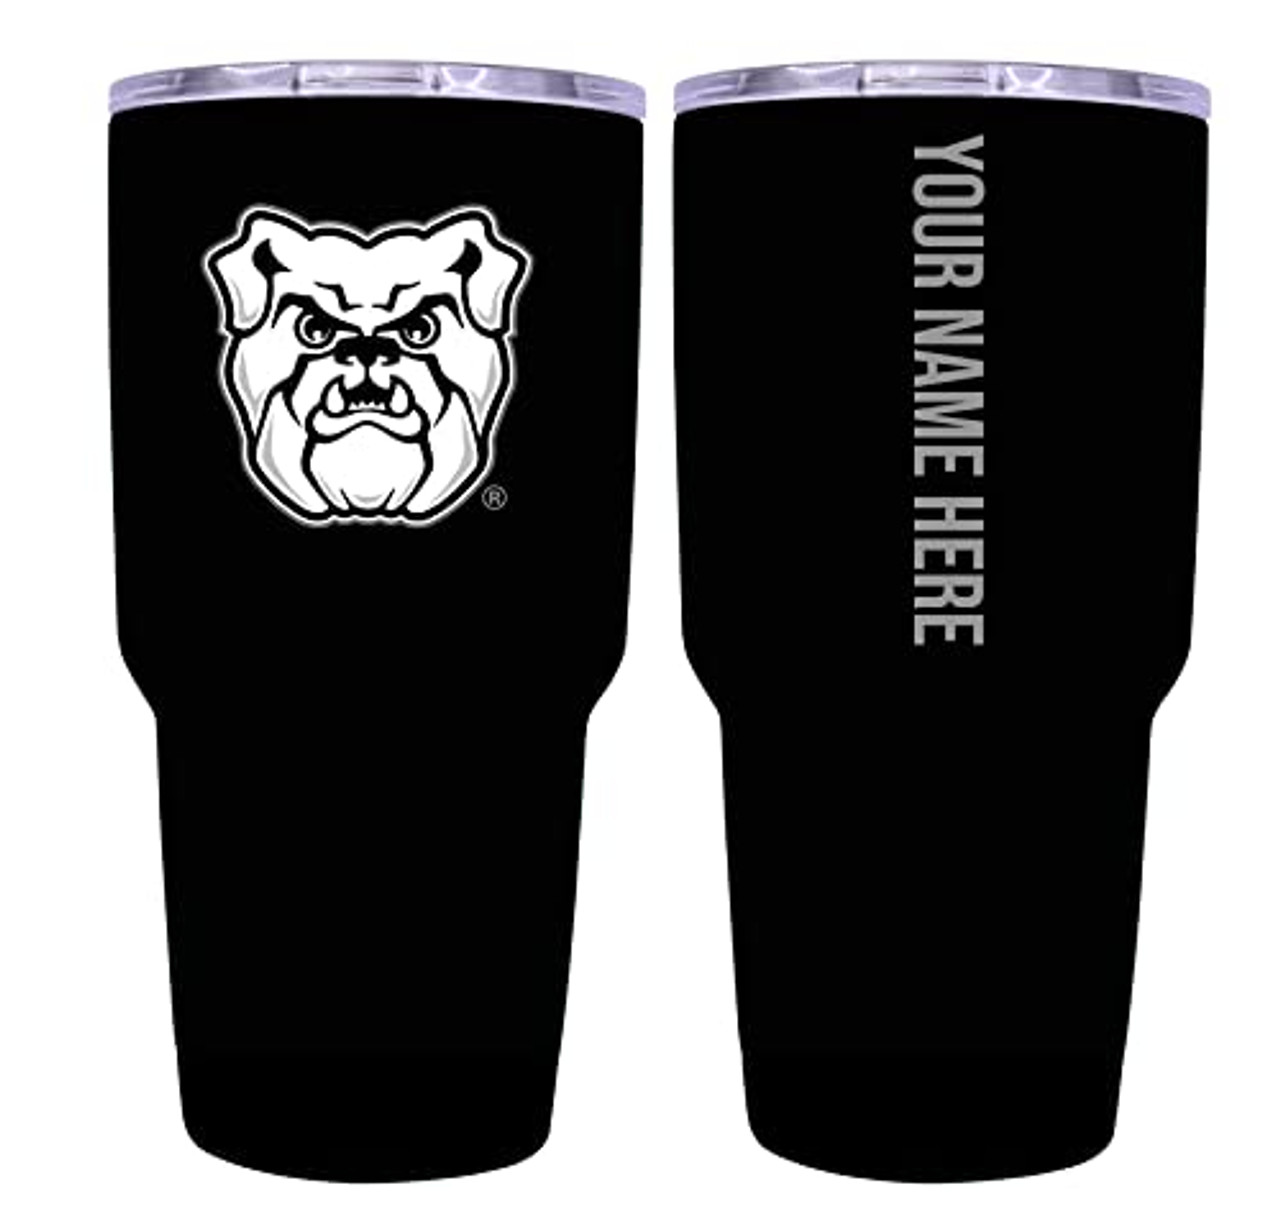 Collegiate Custom Personalized Butler Bulldogs, 24 oz Insulated Stainless Steel Tumbler with Engraved Name (Black)